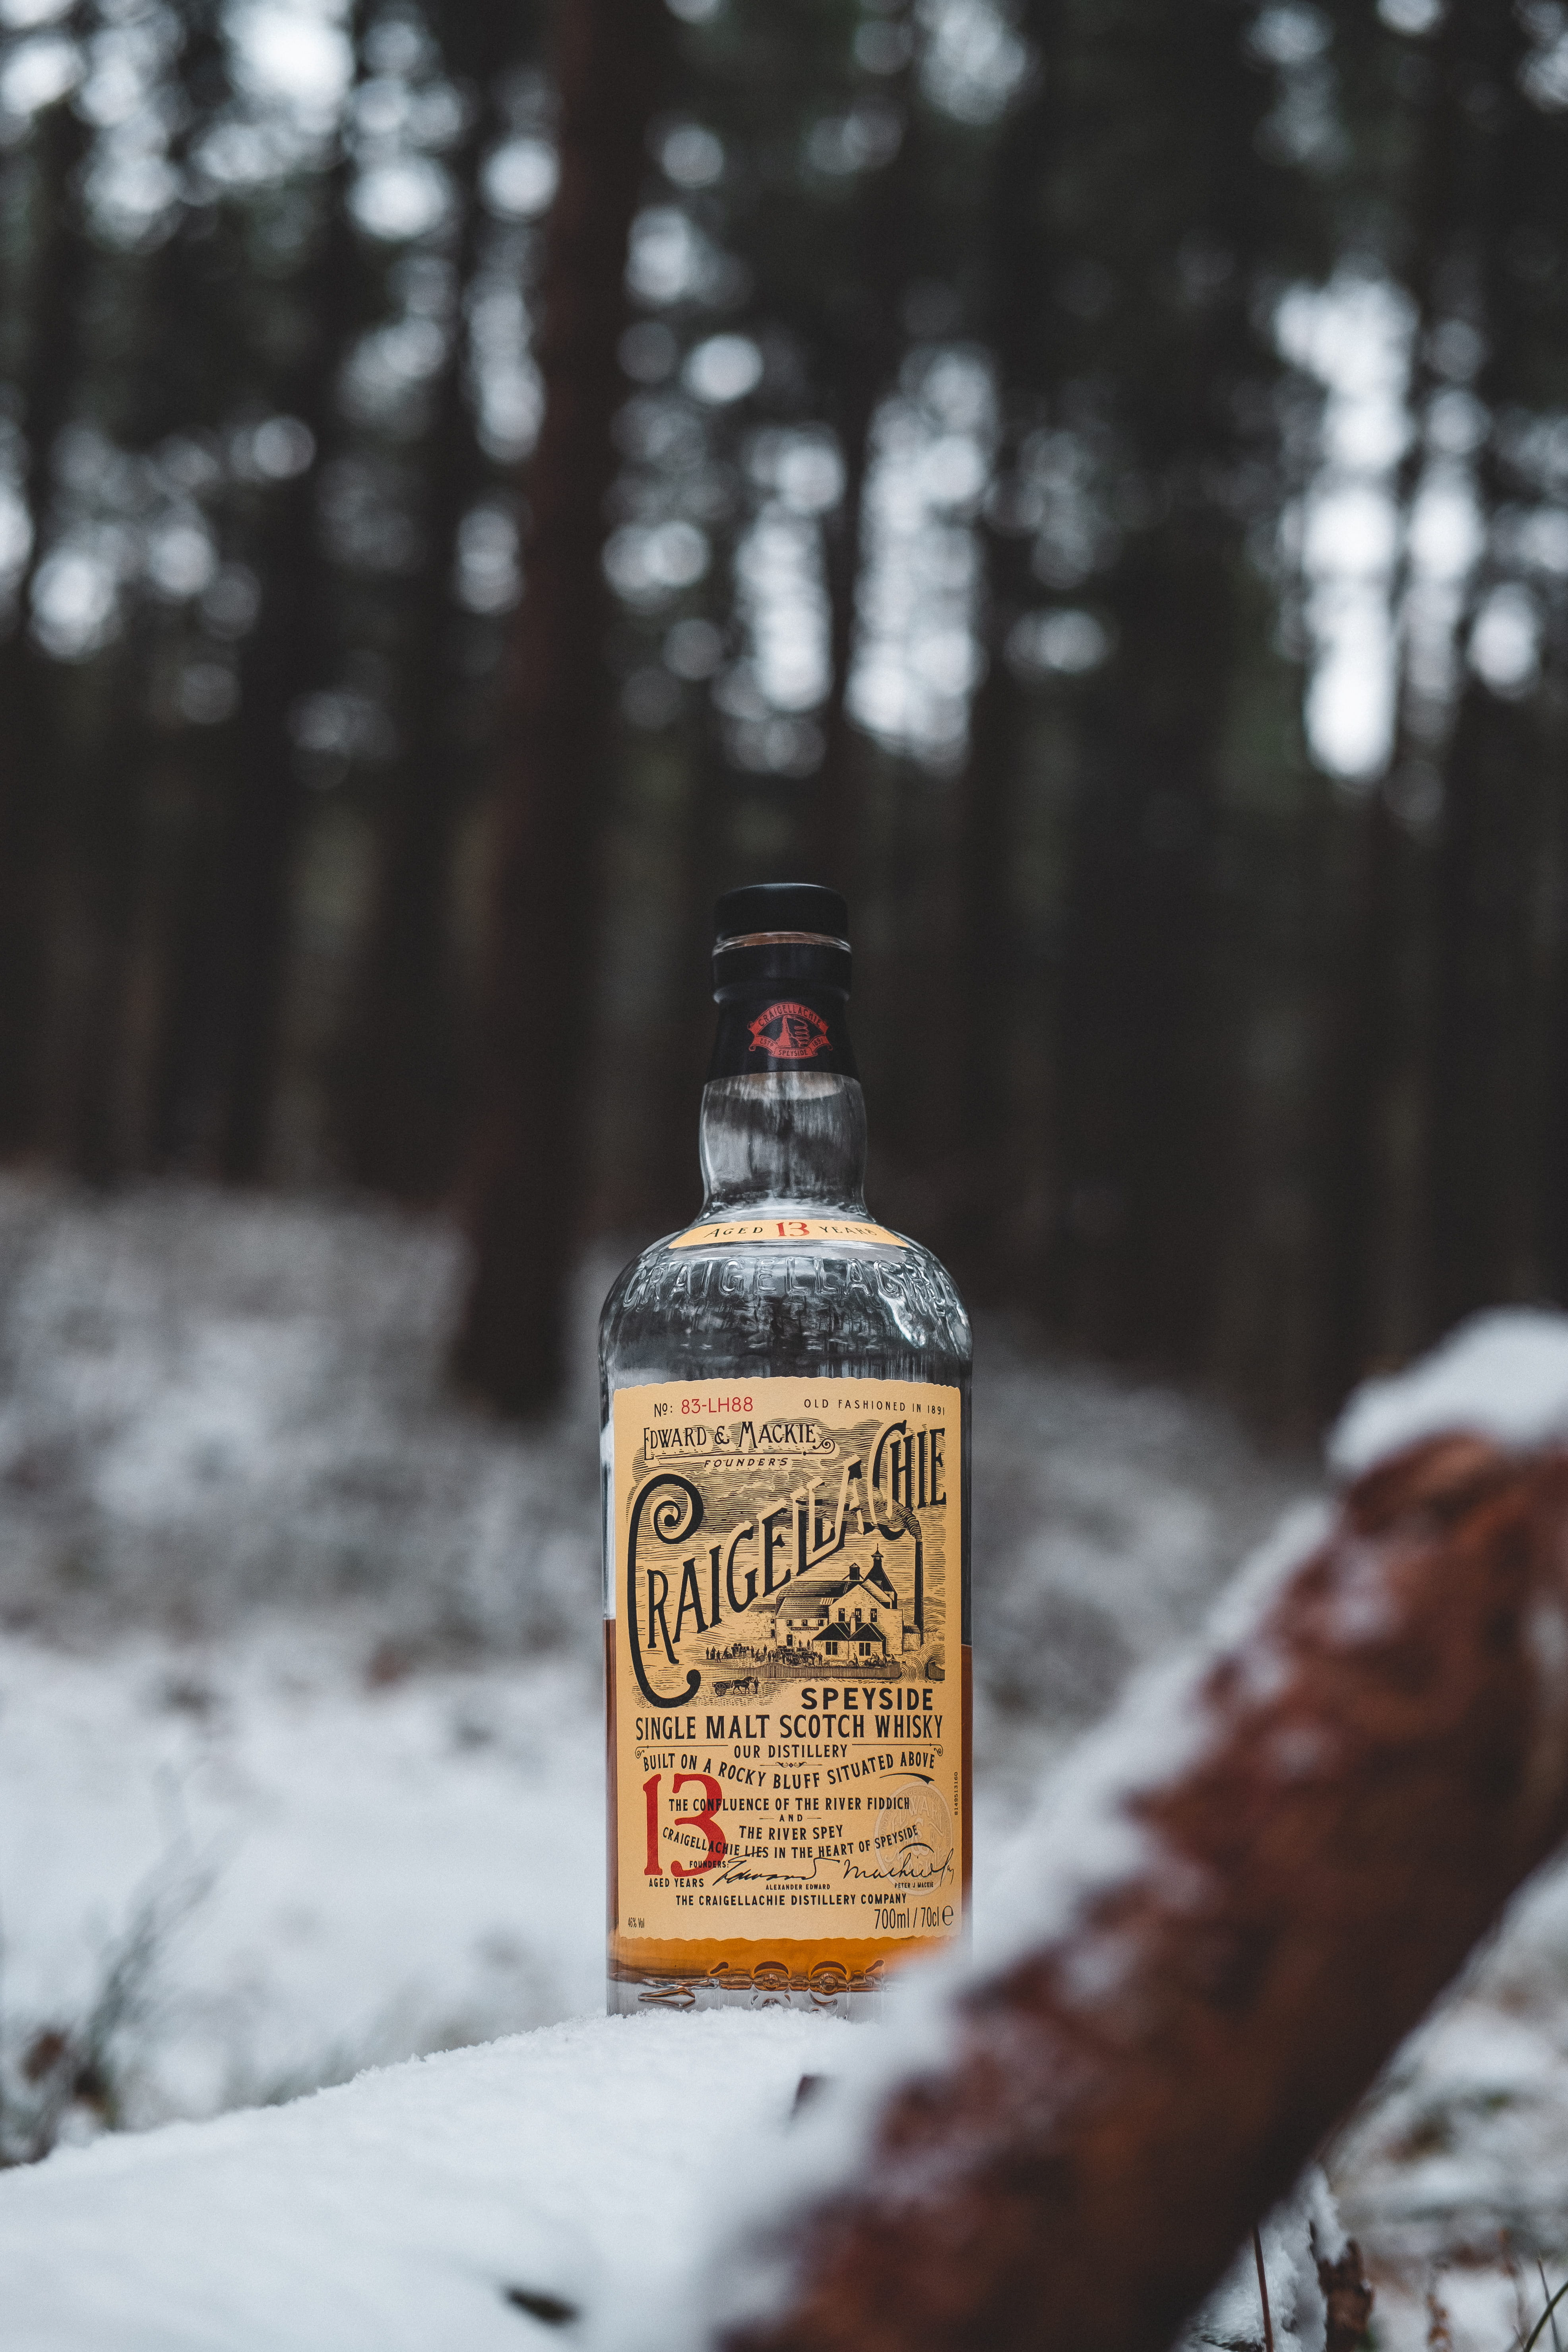 Craigelagie scotch whisky bottle on snow at the woods, text, cold temperature